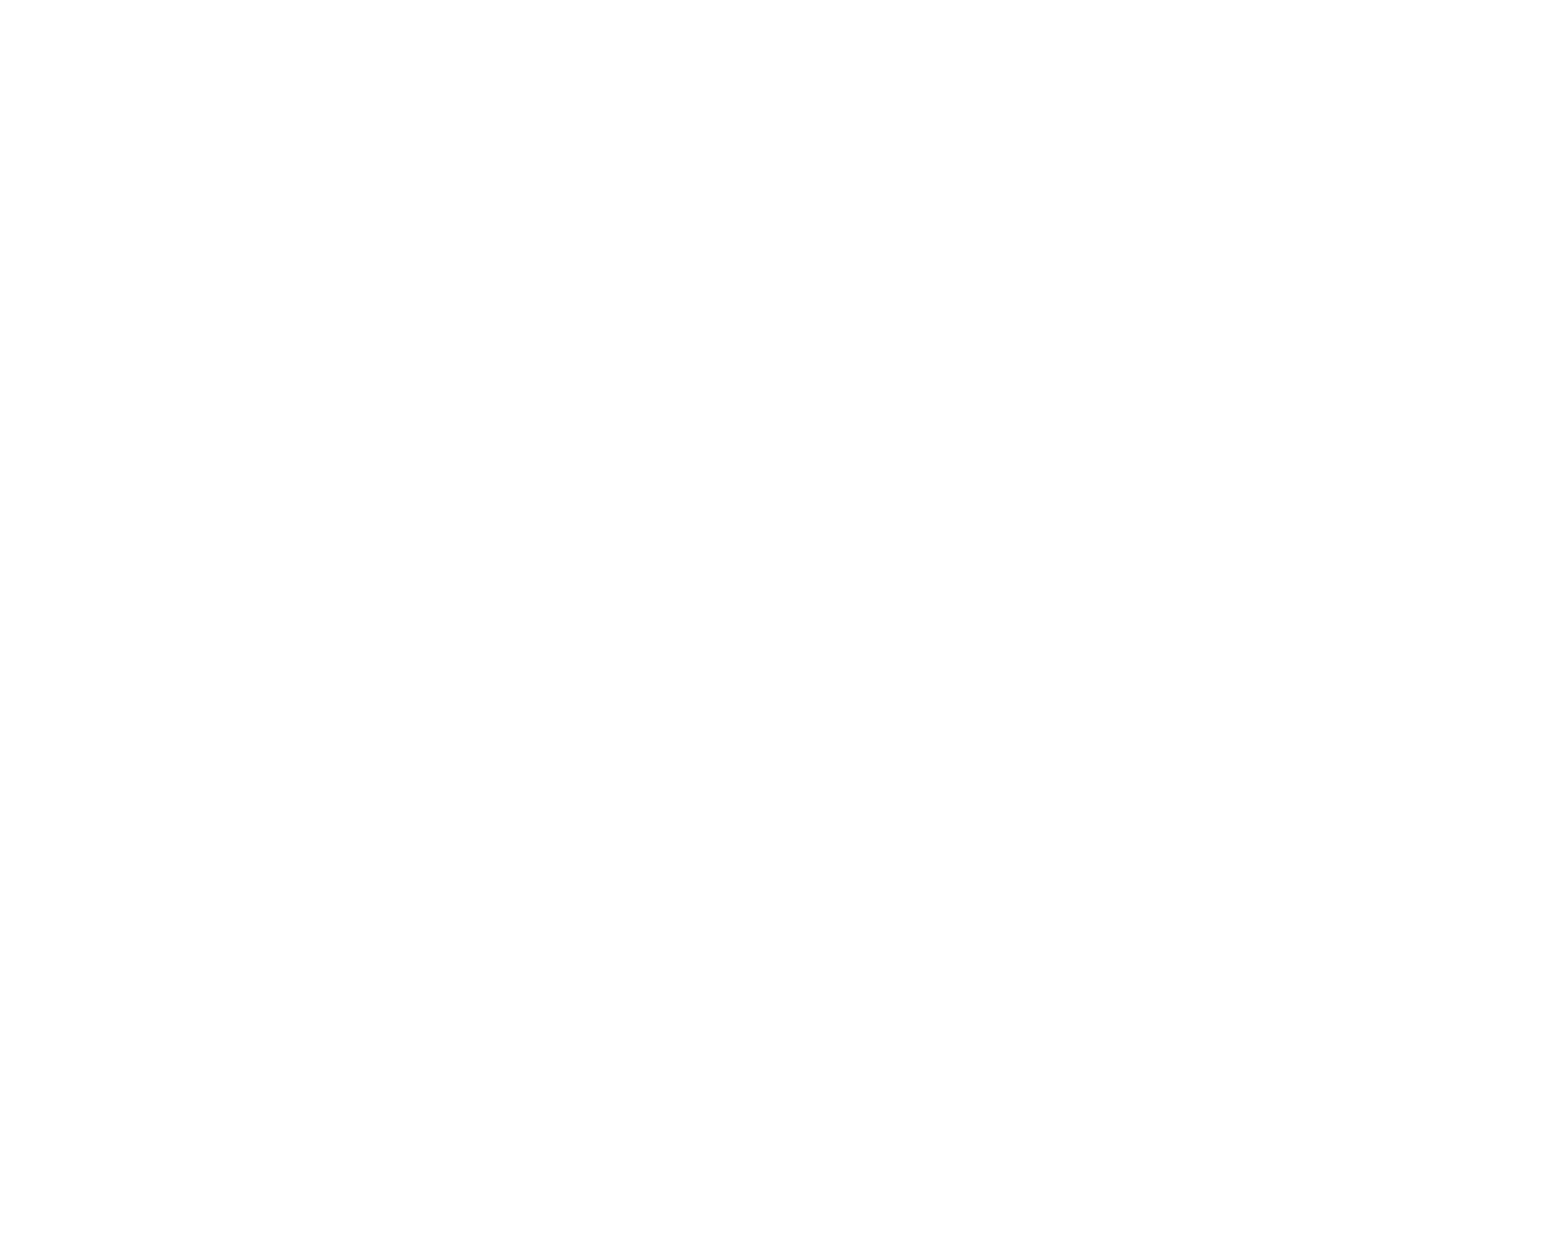 Airbus logo for dark backgrounds (transparent PNG)